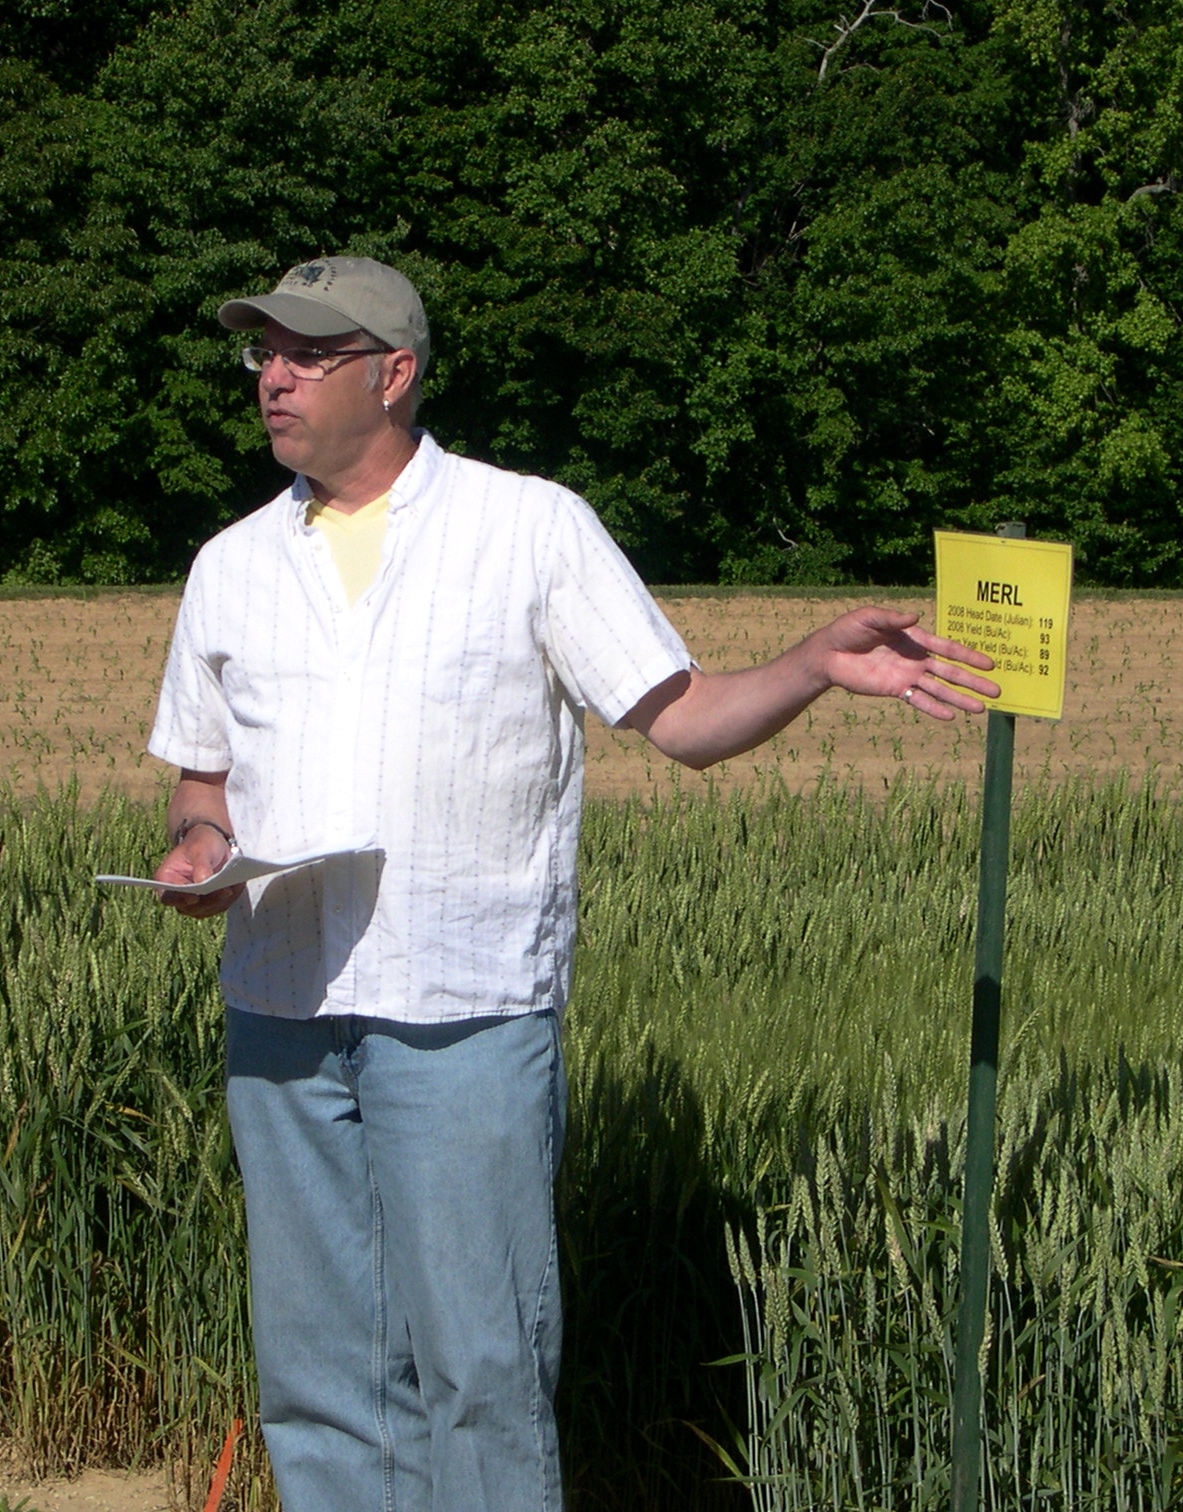 On May 21, Carl Griffey introduced Virginia seed producers to “Merl” – a wheat variety developed for improved milling and baking quality and mildew resistance – at a field day in Mt. Holly, Va. The Eastern Virginia Agricultural Research and Extension Center, Virginia Grain Producers Association, and Virginia Crop Improvement Association sponsored the event. It included recognition of Griffey by the Virginia Agribusiness Council for his contributions to Virginia's wheat and barley